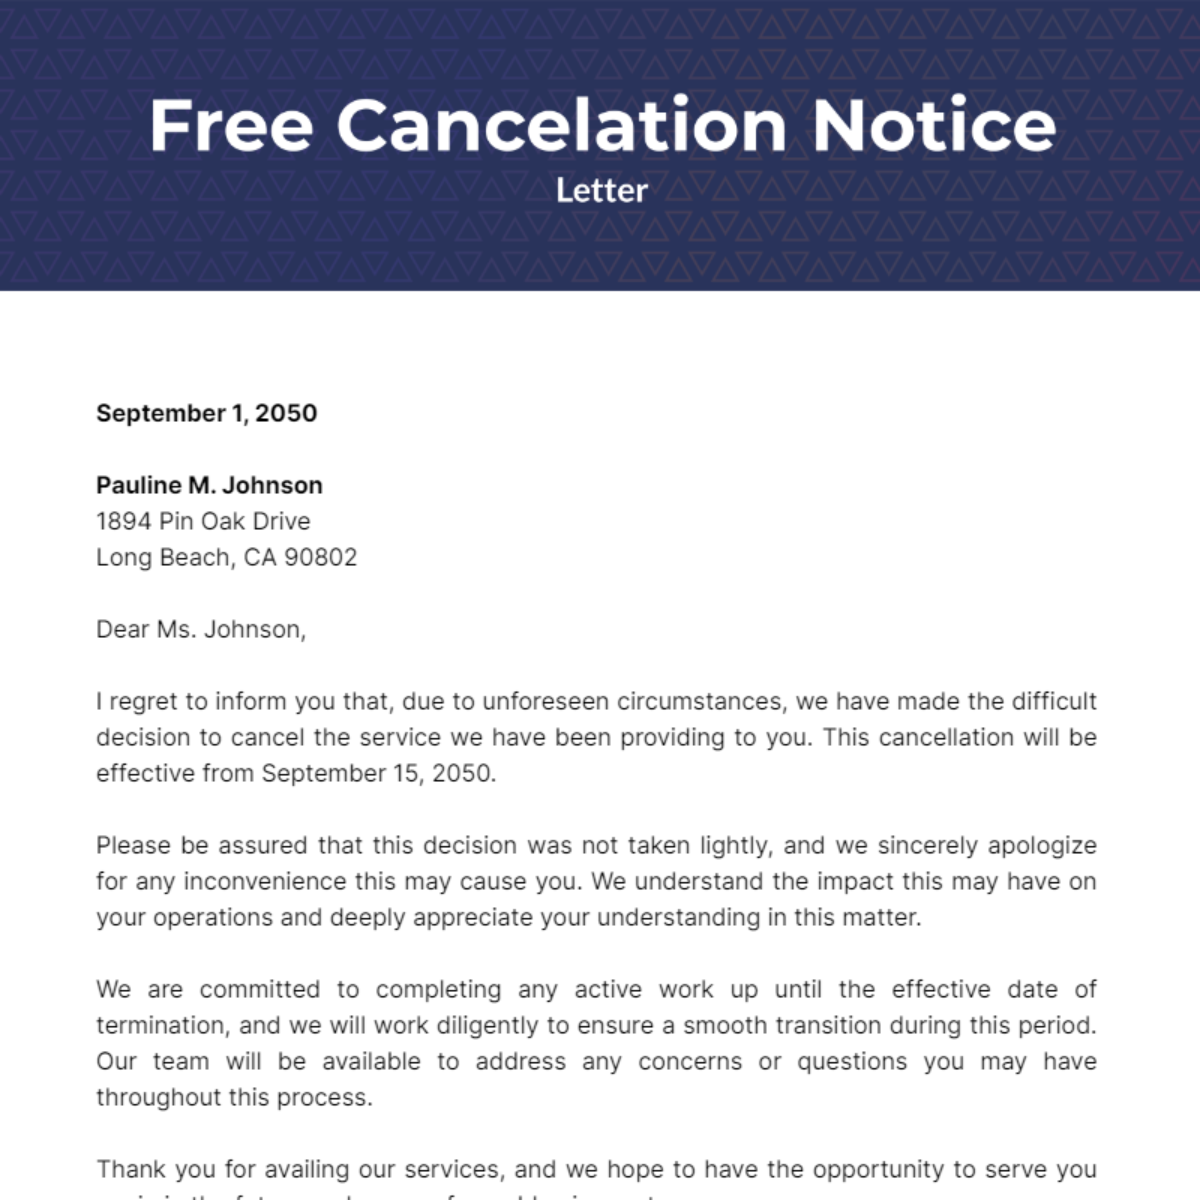 Cancelation Notice Letter Template